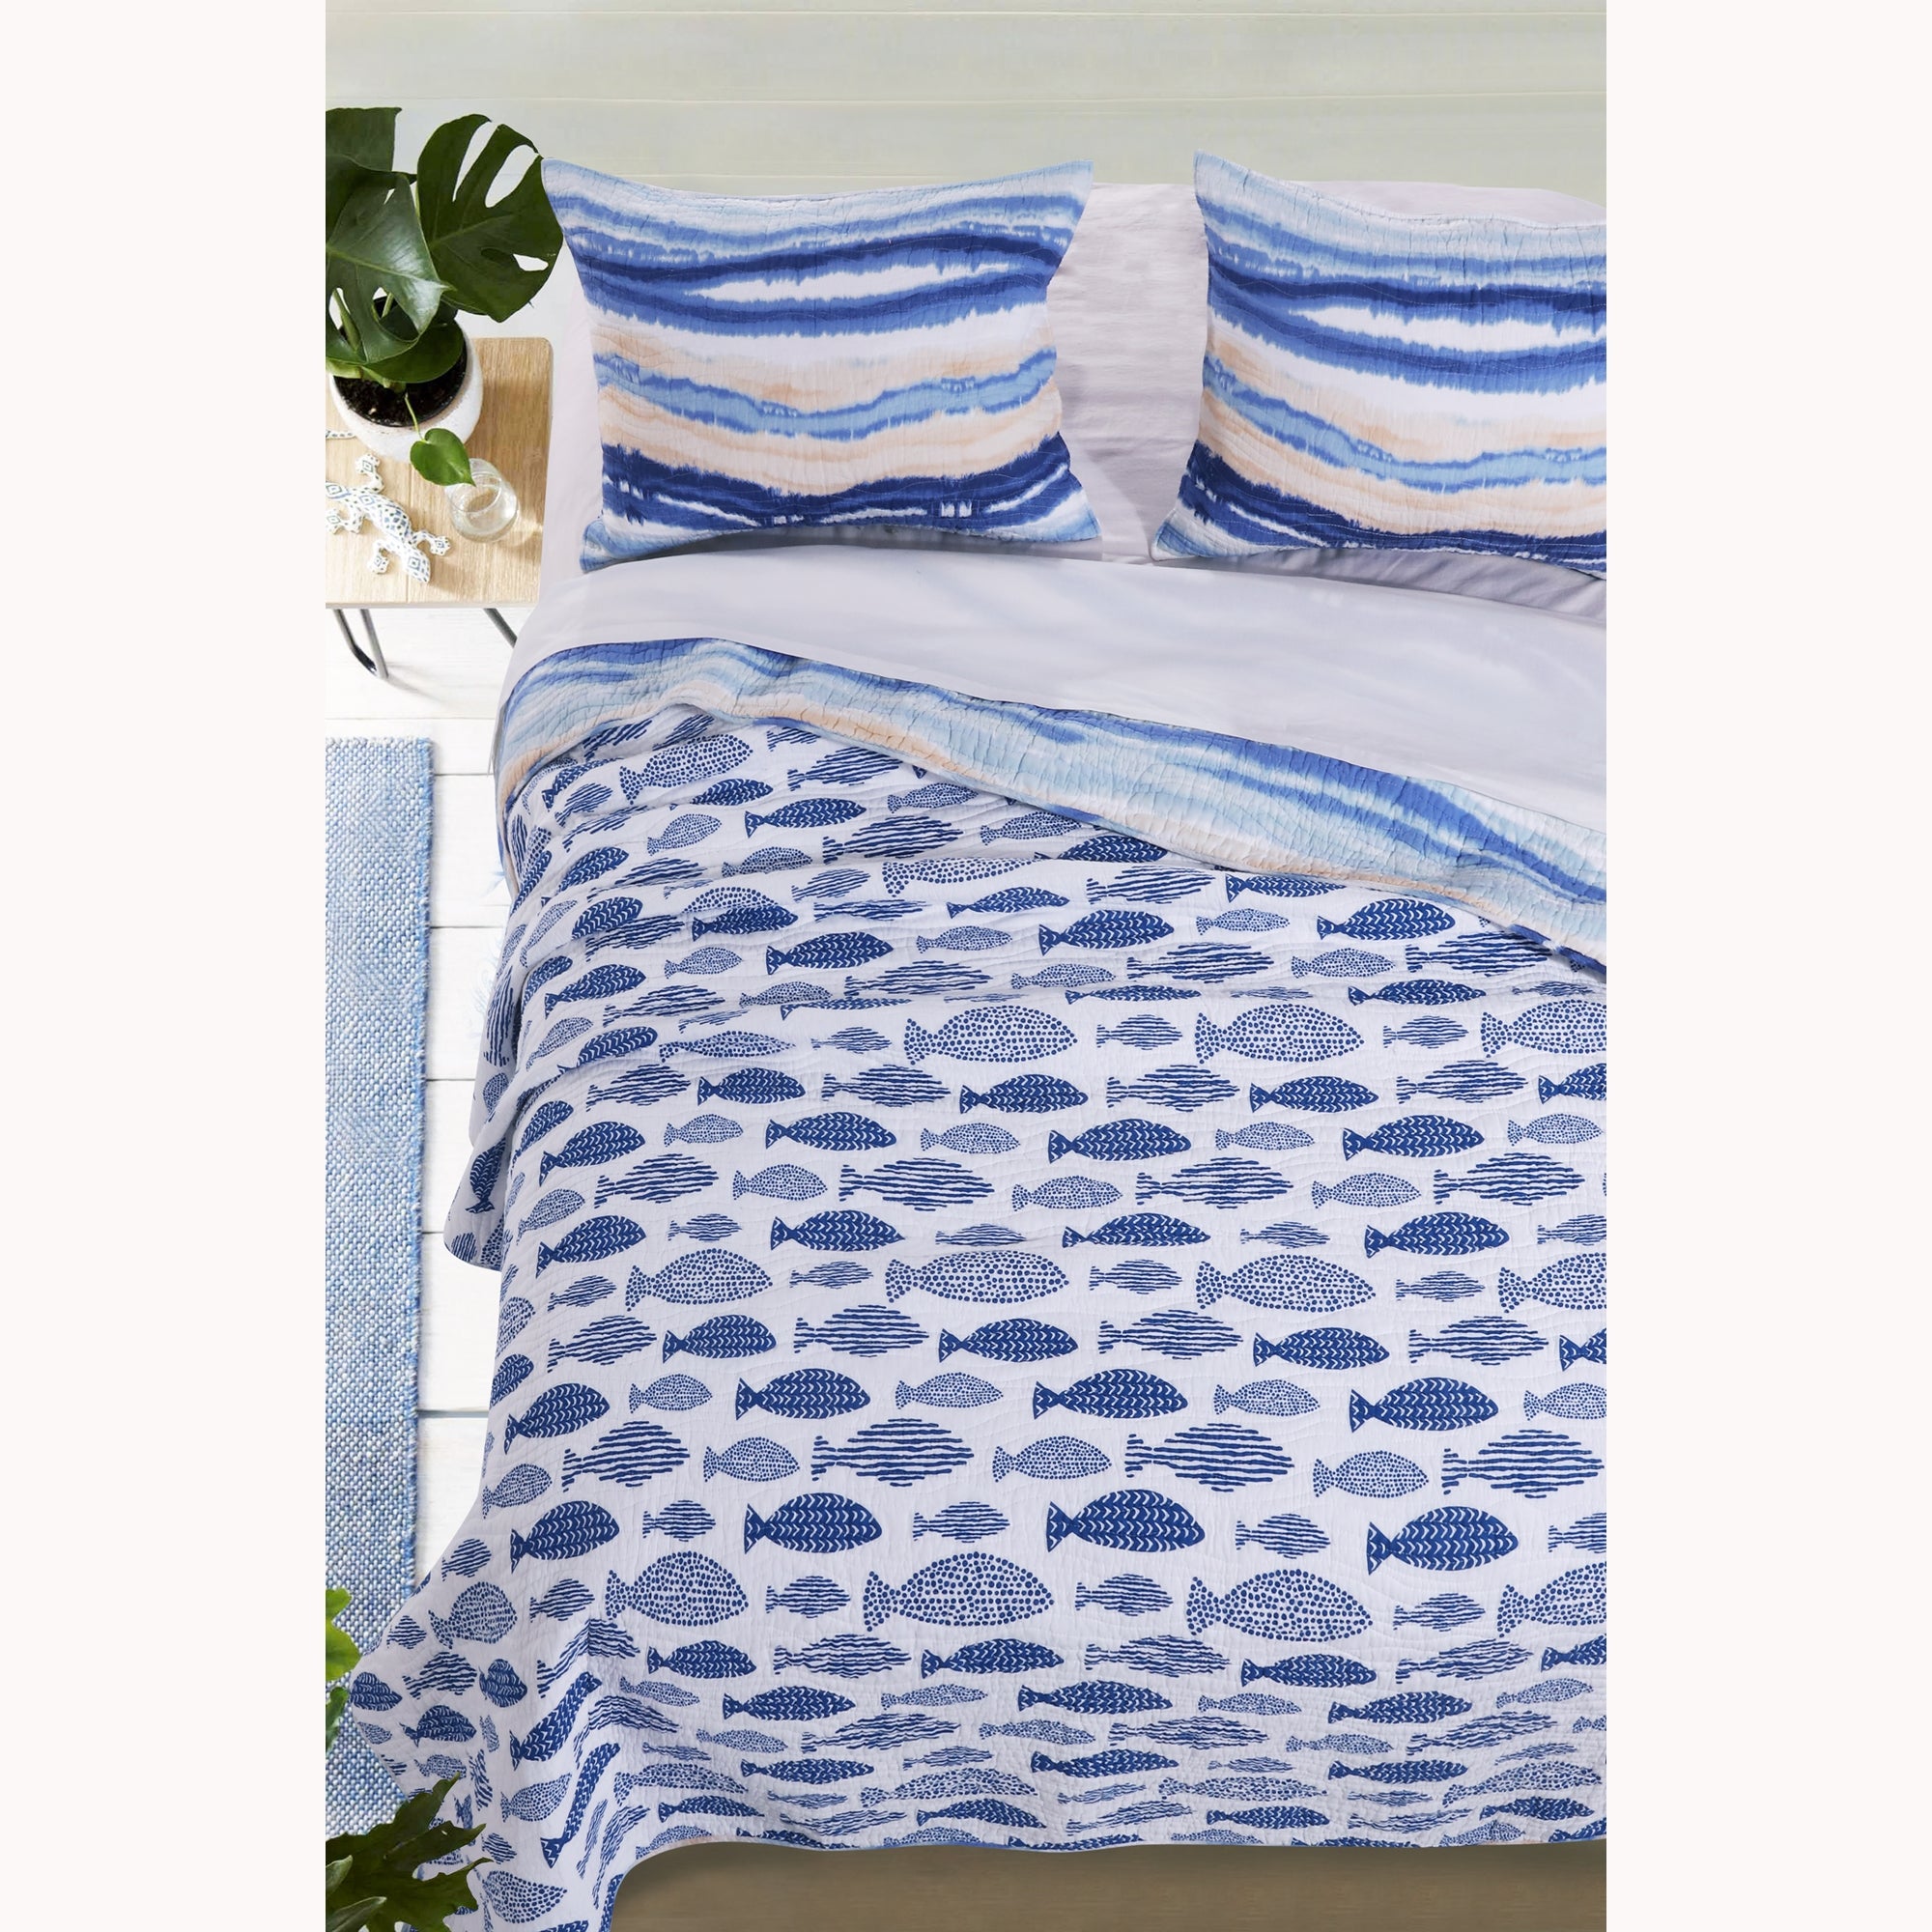 Barefoot Bungalow Crystal Cove Quilt and Pillow Sham Set - Blue